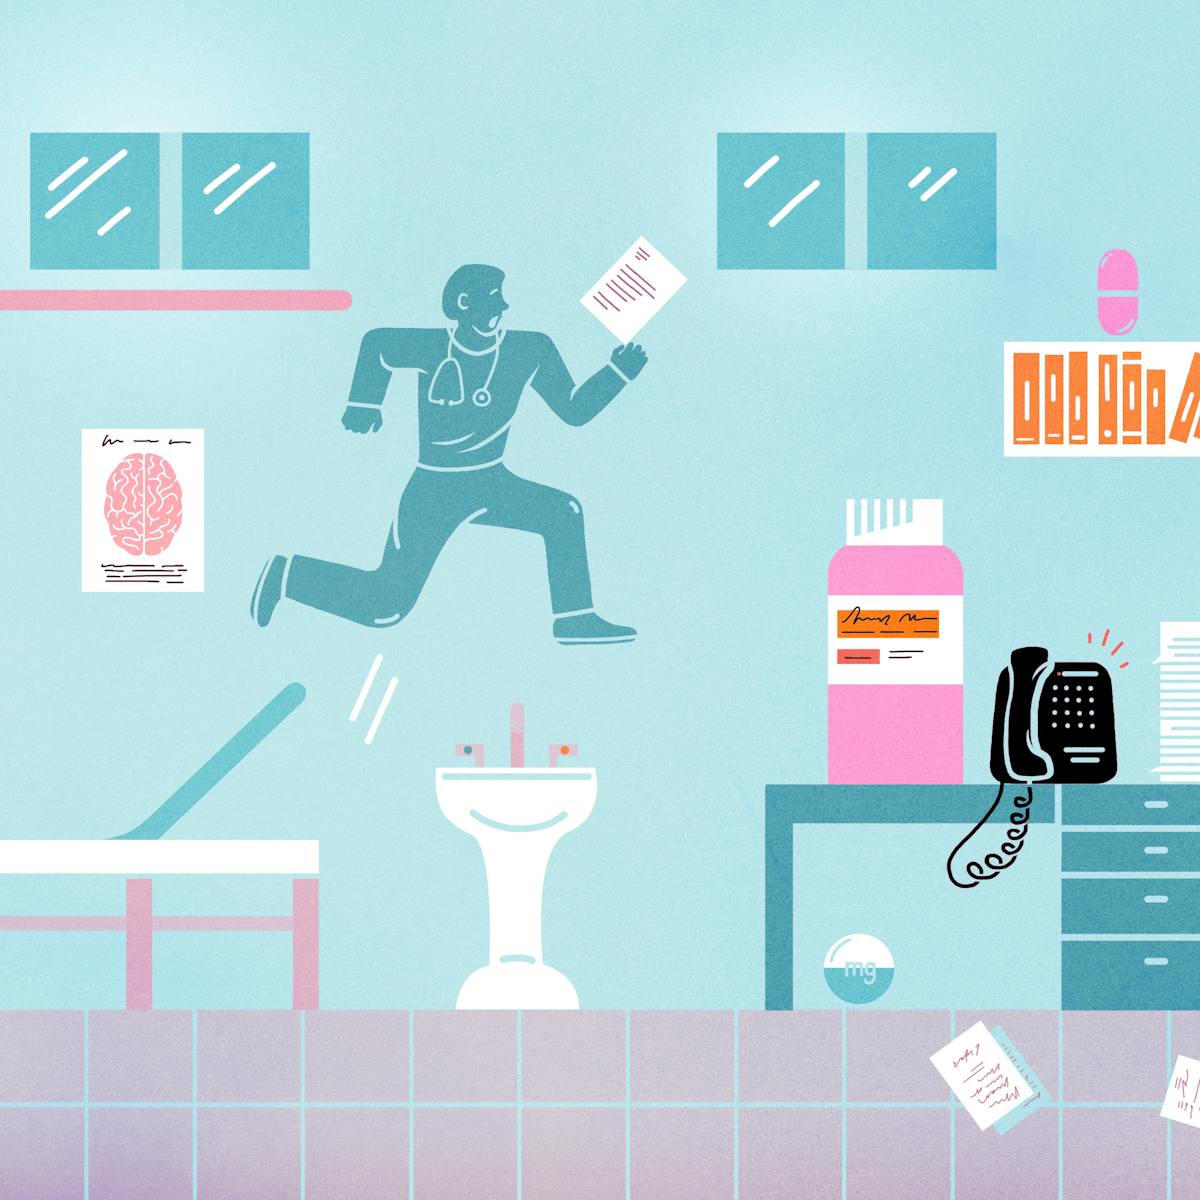 Illustration of a doctor in the style of a video game, jumping over numerous obstacles such as a pile of papers, a ringing telephone, oversized medicine bottles, all while on the clock.